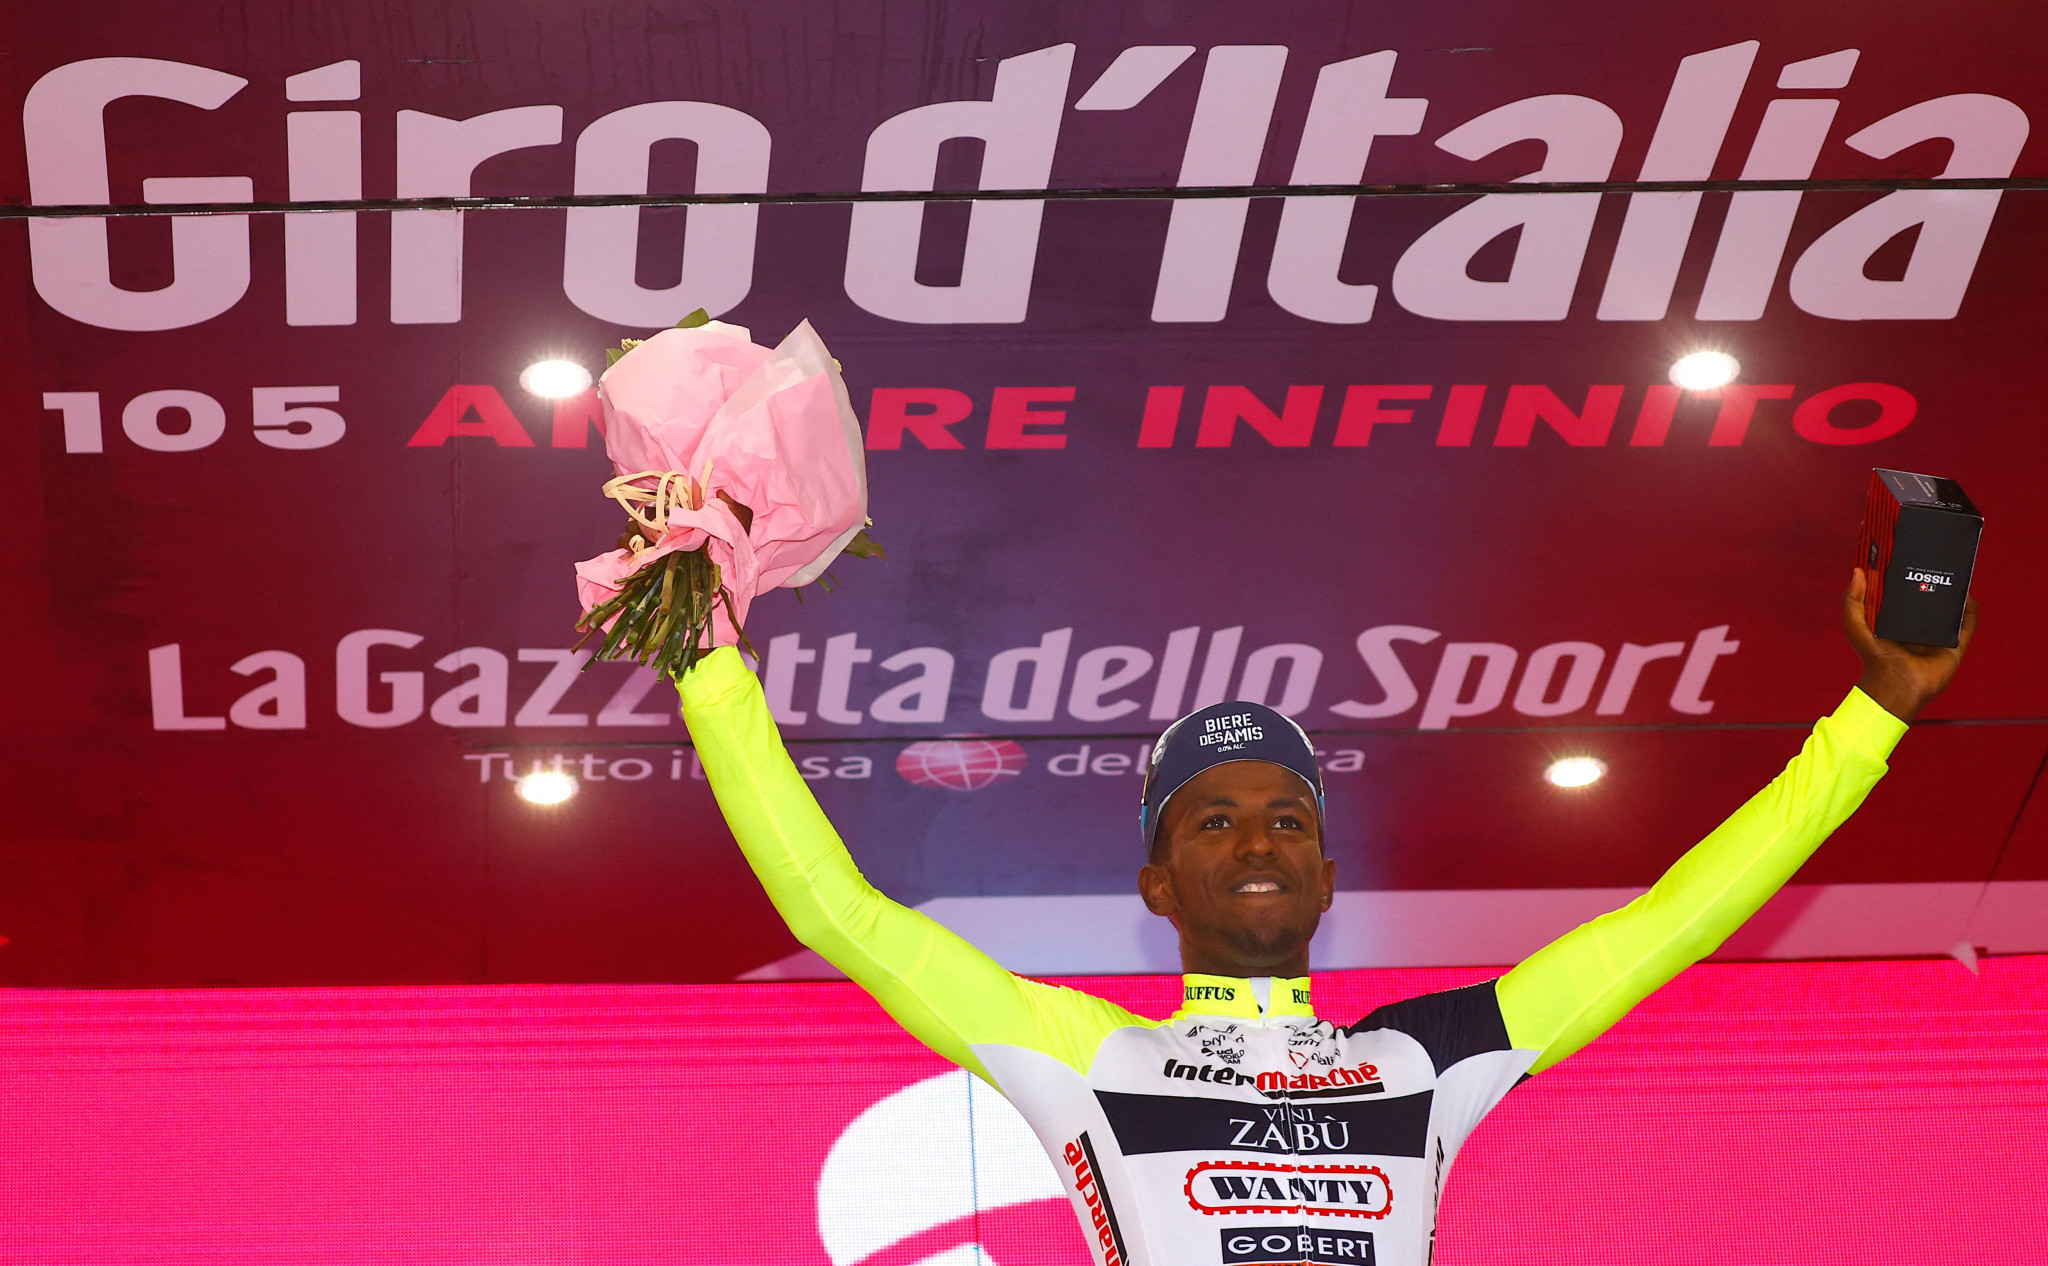 Eritrean rider Biniam Girmay won stage 10 of last month's Giro d'Italia but up to 30 riders from African nations could be given the opportunity to ride in Europe as part of the new UCI-ANOCA scheme ©Getty Images